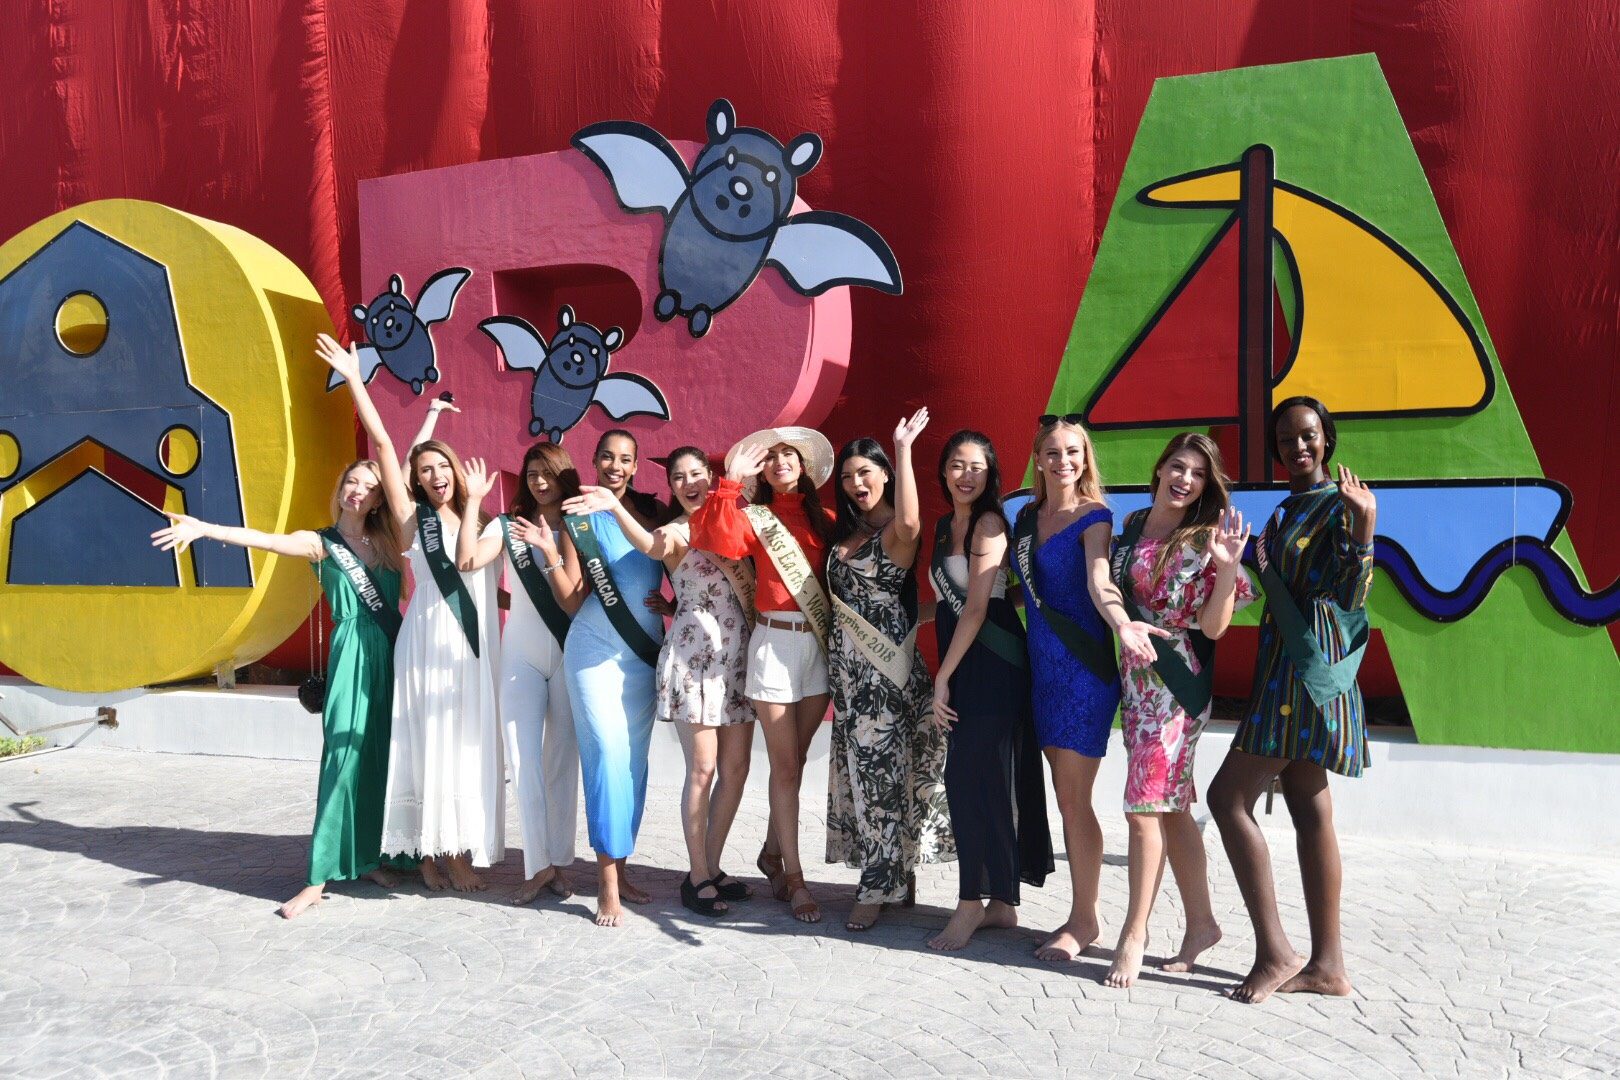 GUESTS. Representatives from Miss Earth arrive at Cagban port for Boracay's official opening on October 26, 2018. Photo by Alecs Ongcal/Rappler 